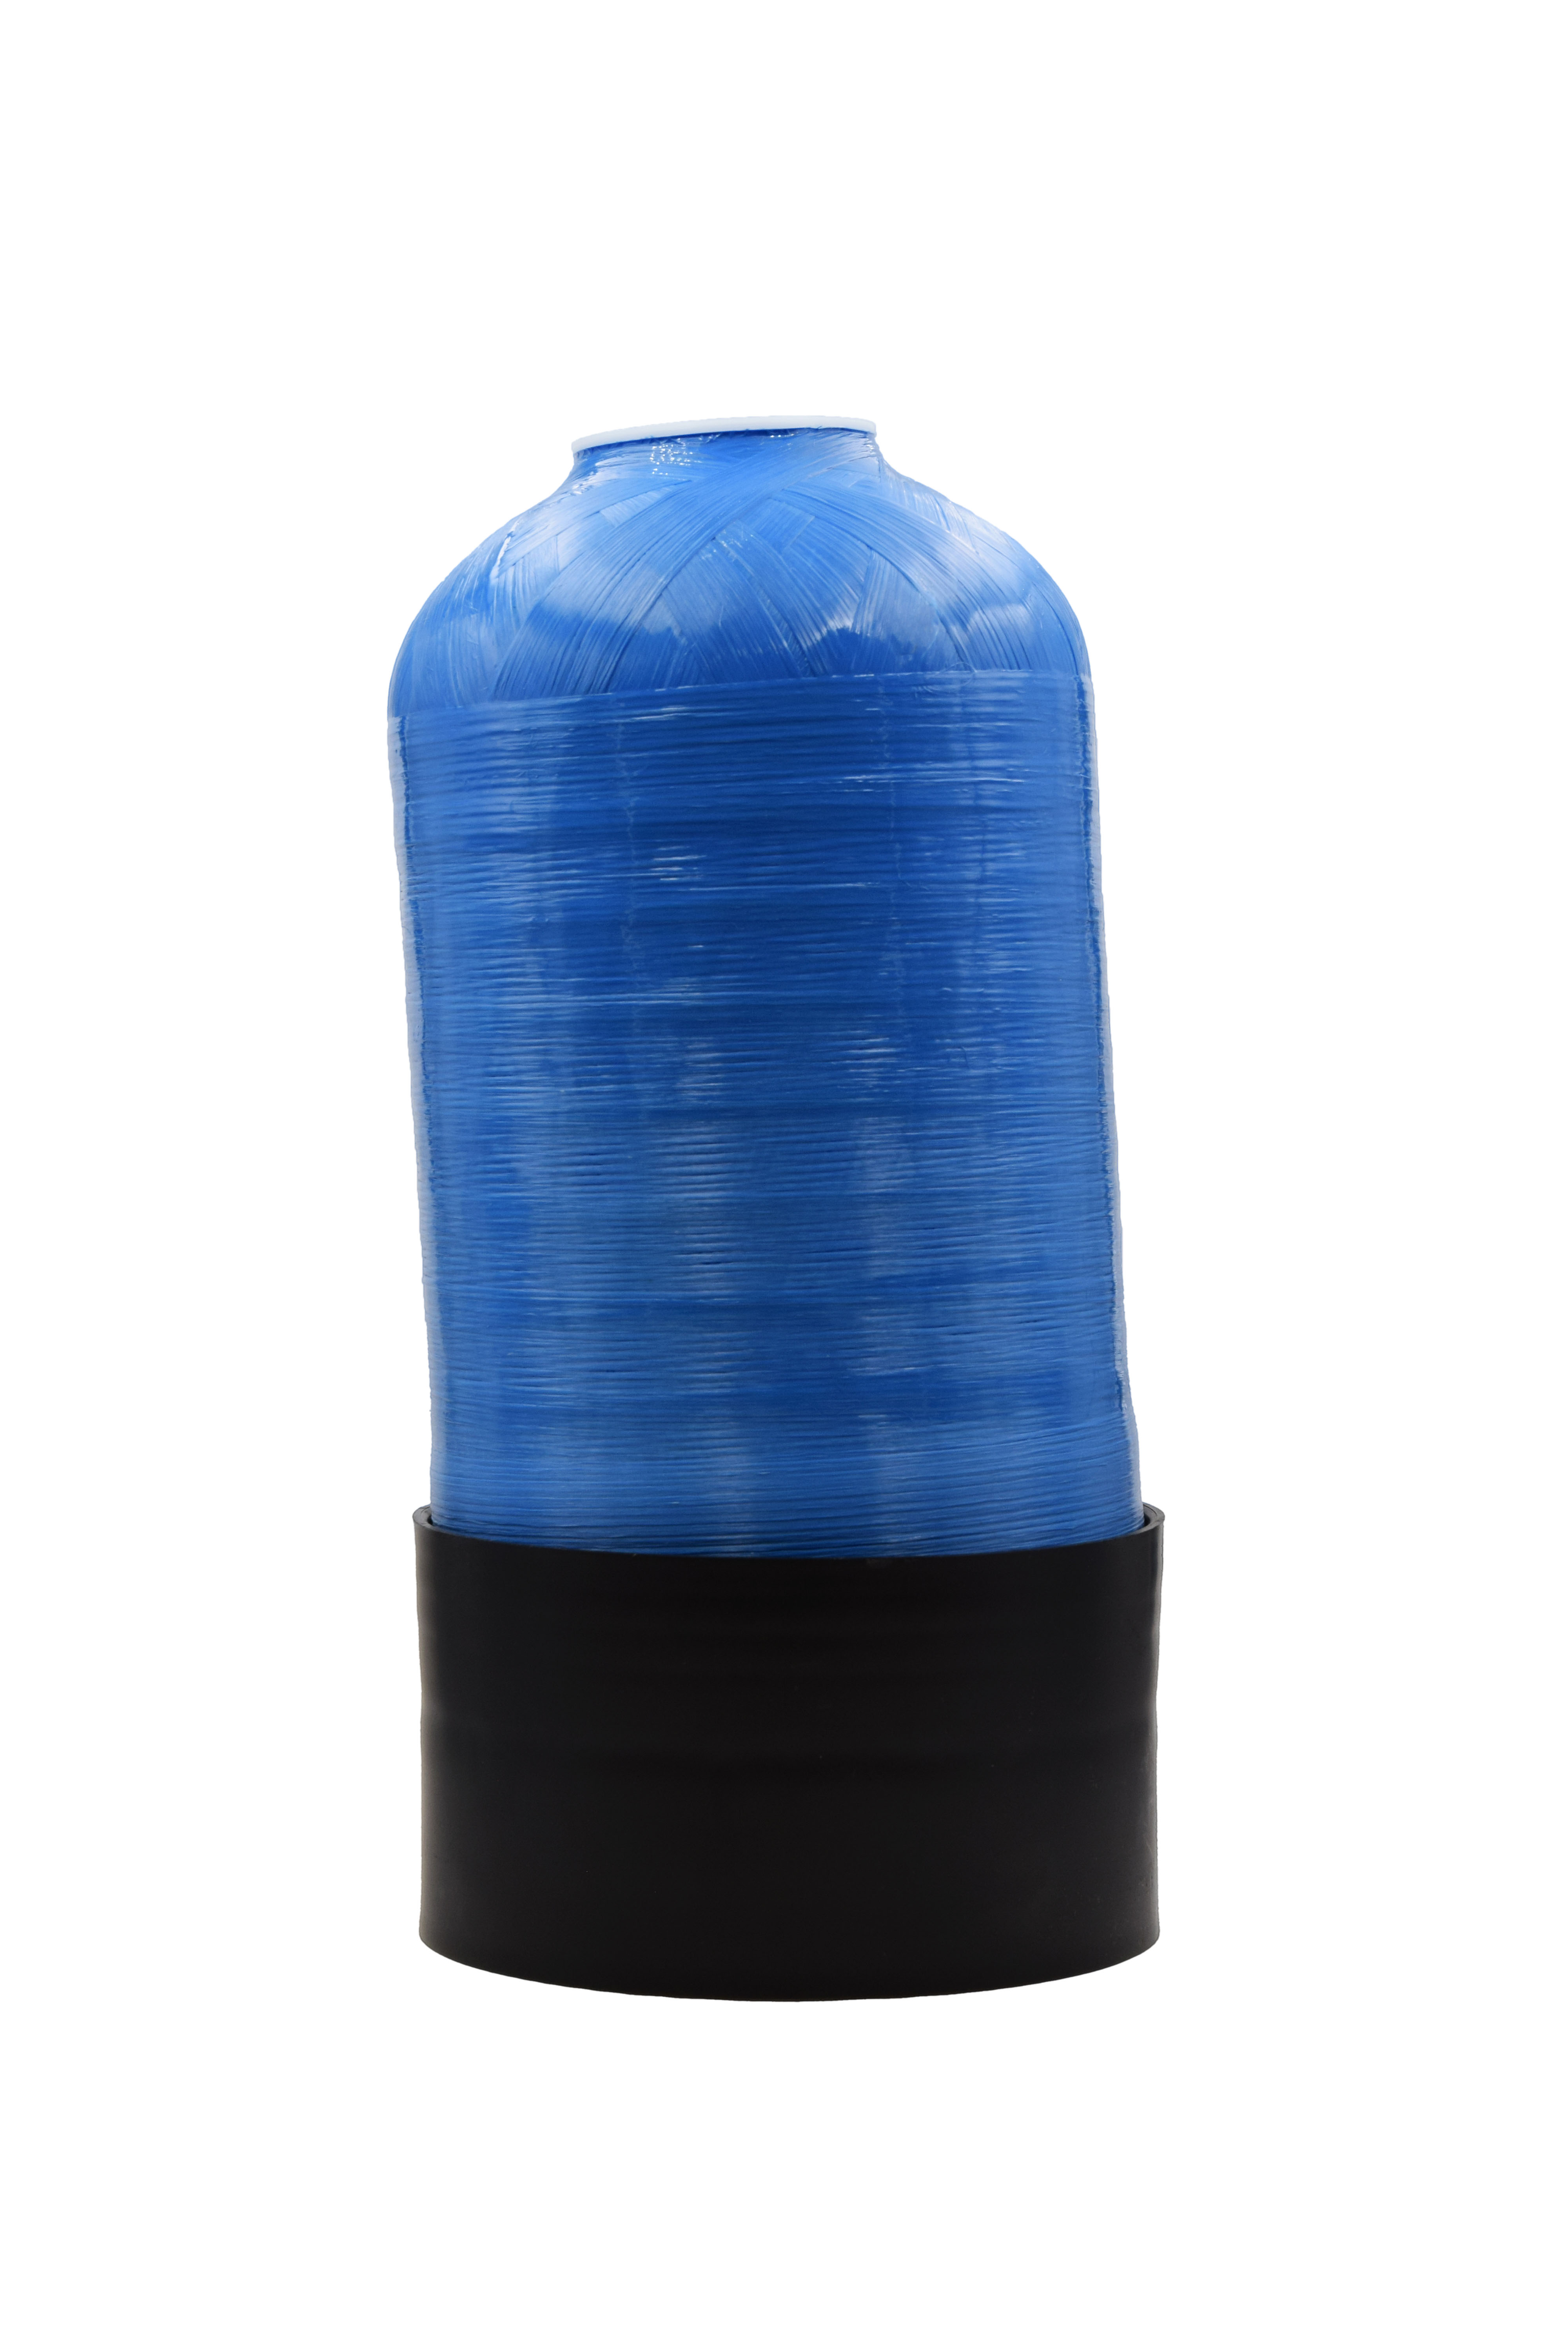 30 Liter Plastic Mixed Bed Demineralization Cartridge Filled with Premium Resin